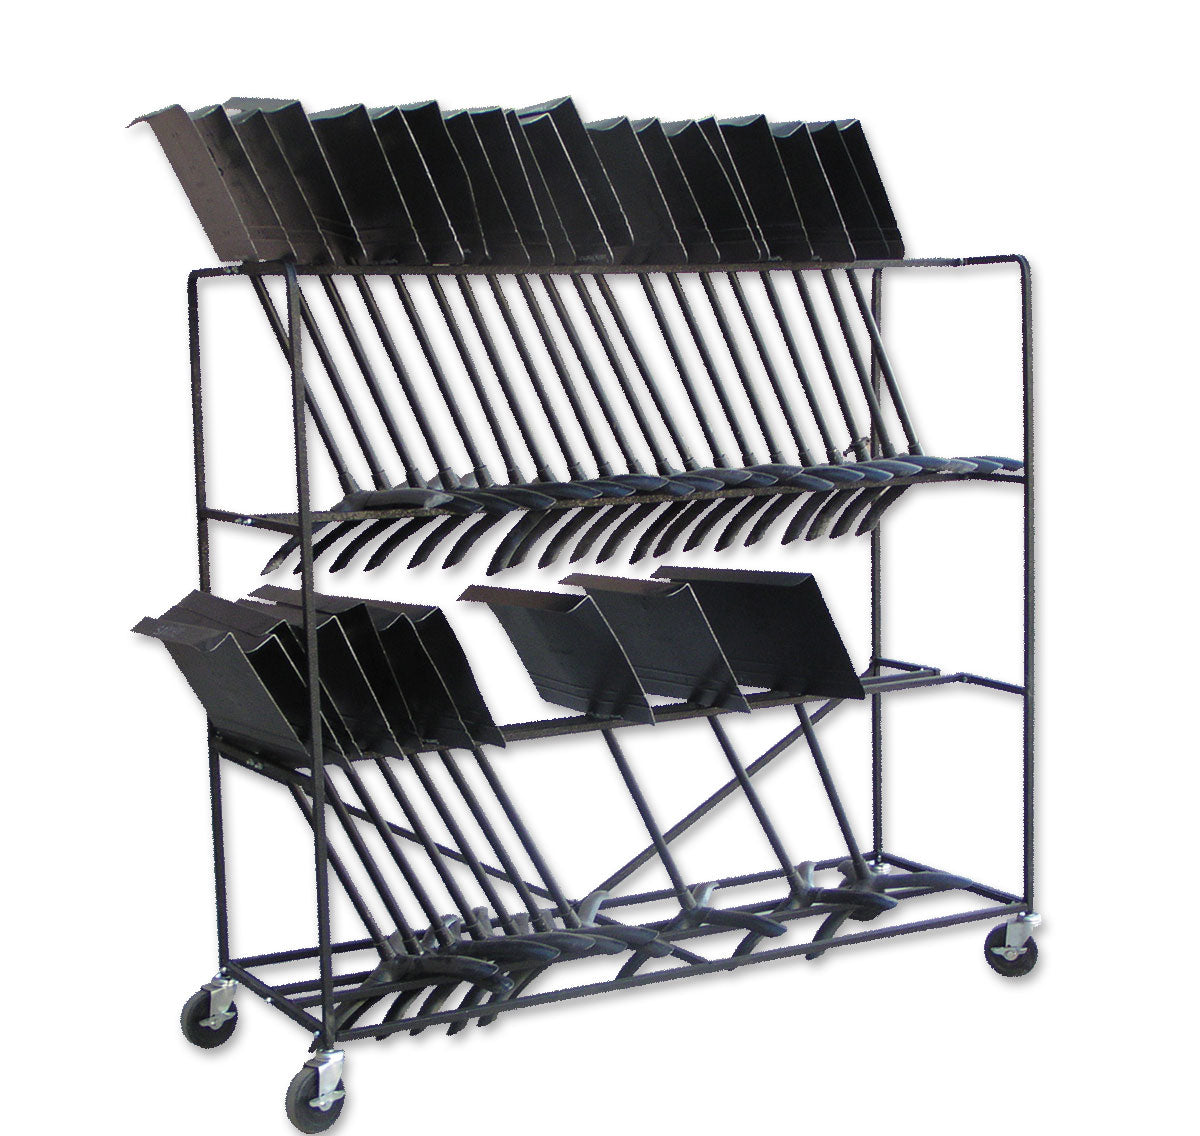 Great double decker dish rack 👍🏼 #myfavoriteproducts